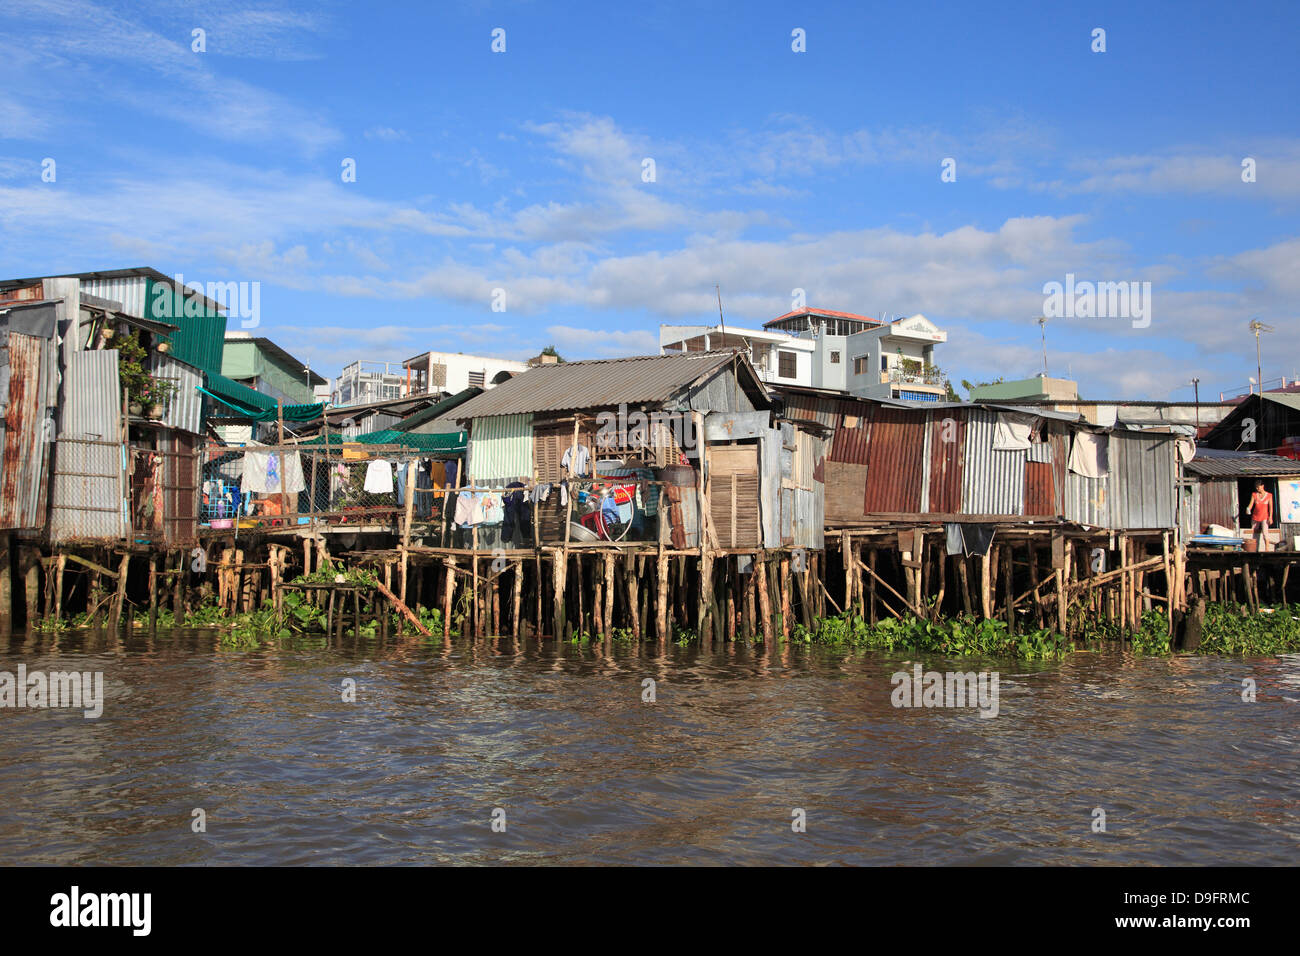 Stilt houses on the waterfront, Can Tho, Mekong River, Mekong Delta, Can Tho Province, Vietnam, Indochina, Southeast Asia Stock Photo